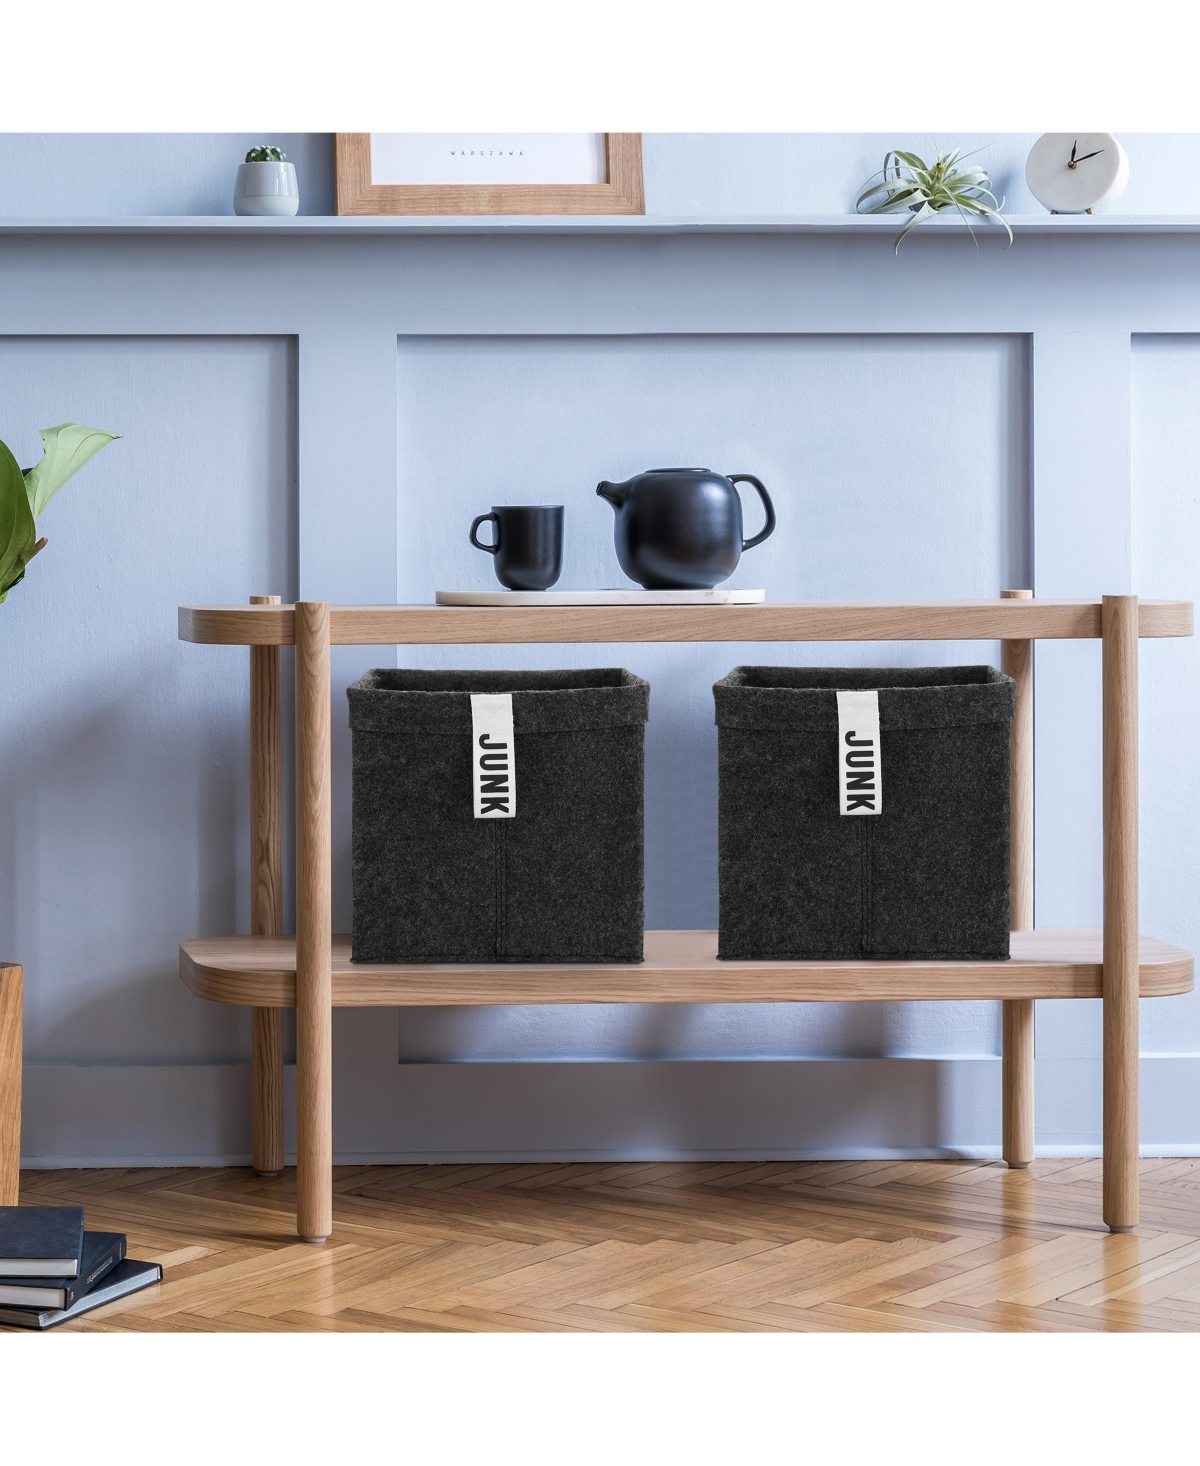 Shop Welaxy 3 Piece Collapsible Square Storage Bins With Printed Handles In Charcoal